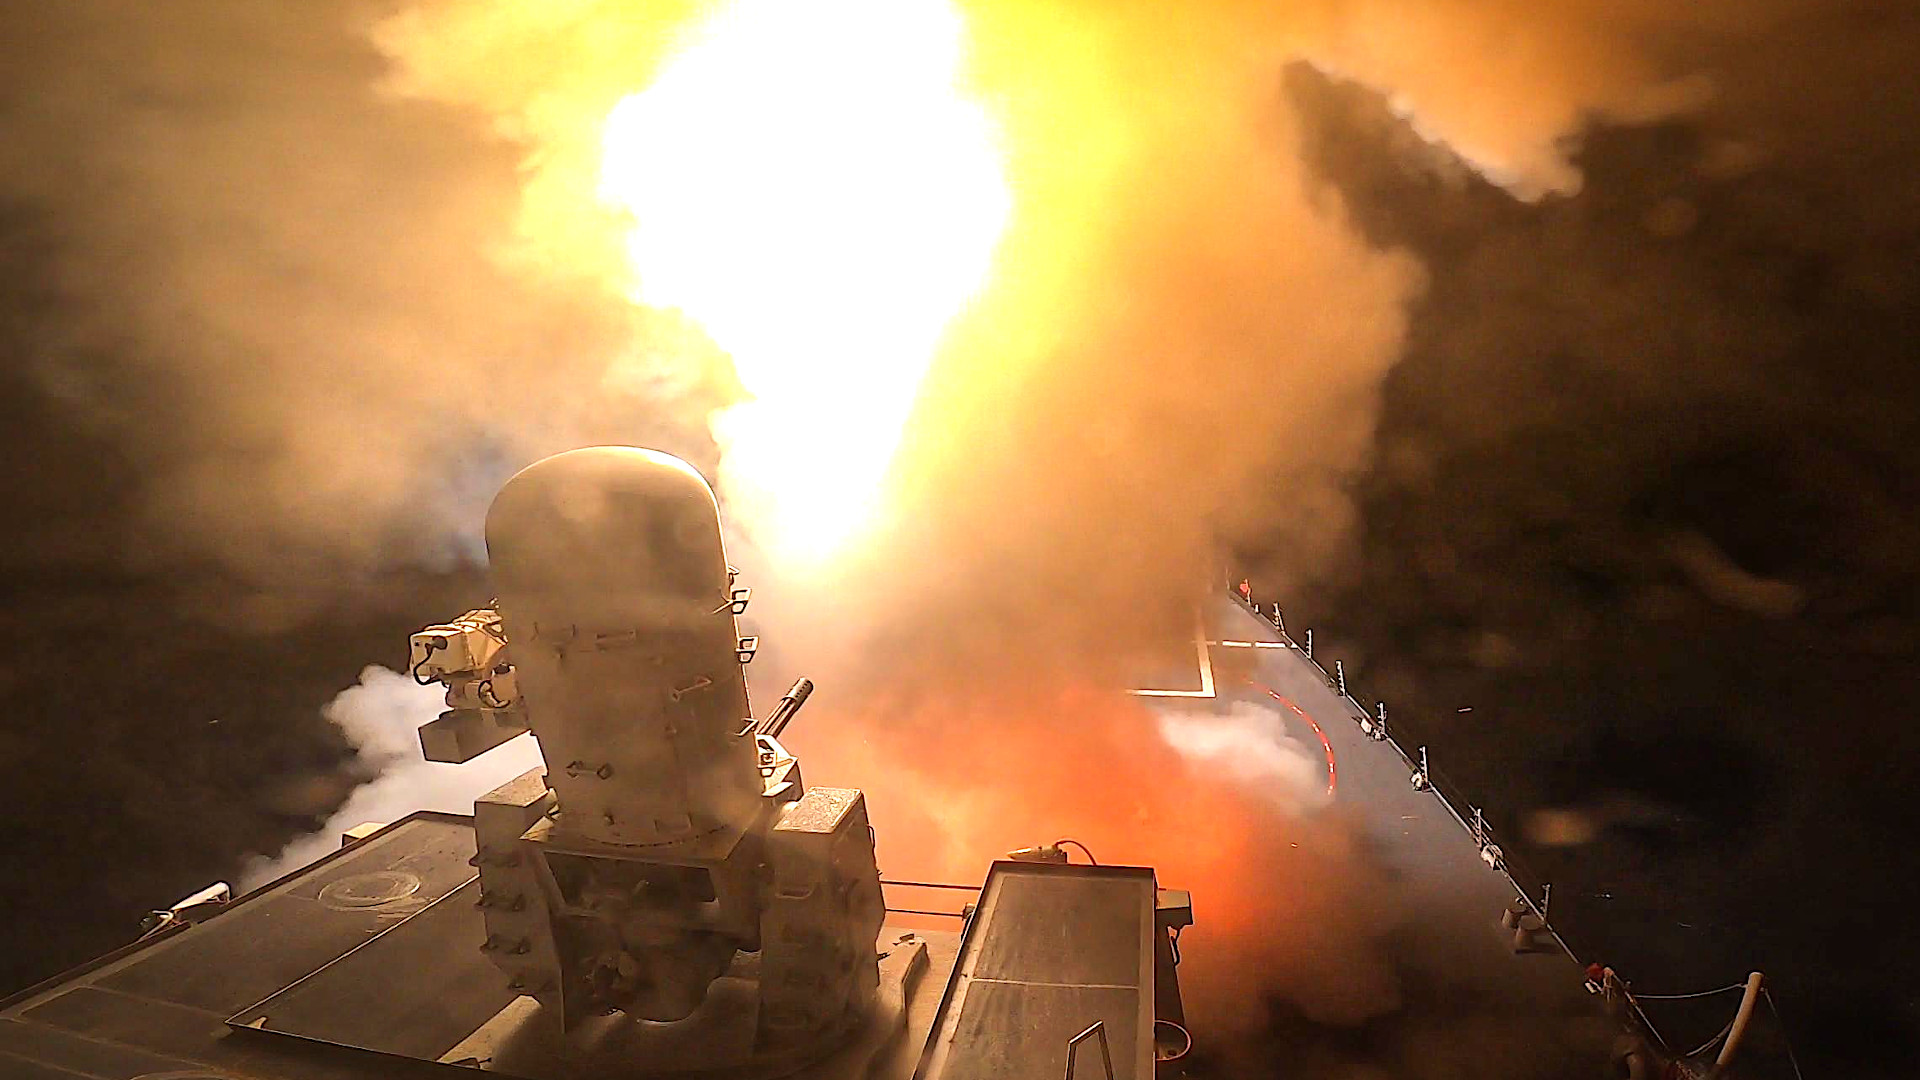 US Navy destroyers have fired around 100 Standard series surface-to-air missiles against Houthi missiles and drones since October, according to a recent report.